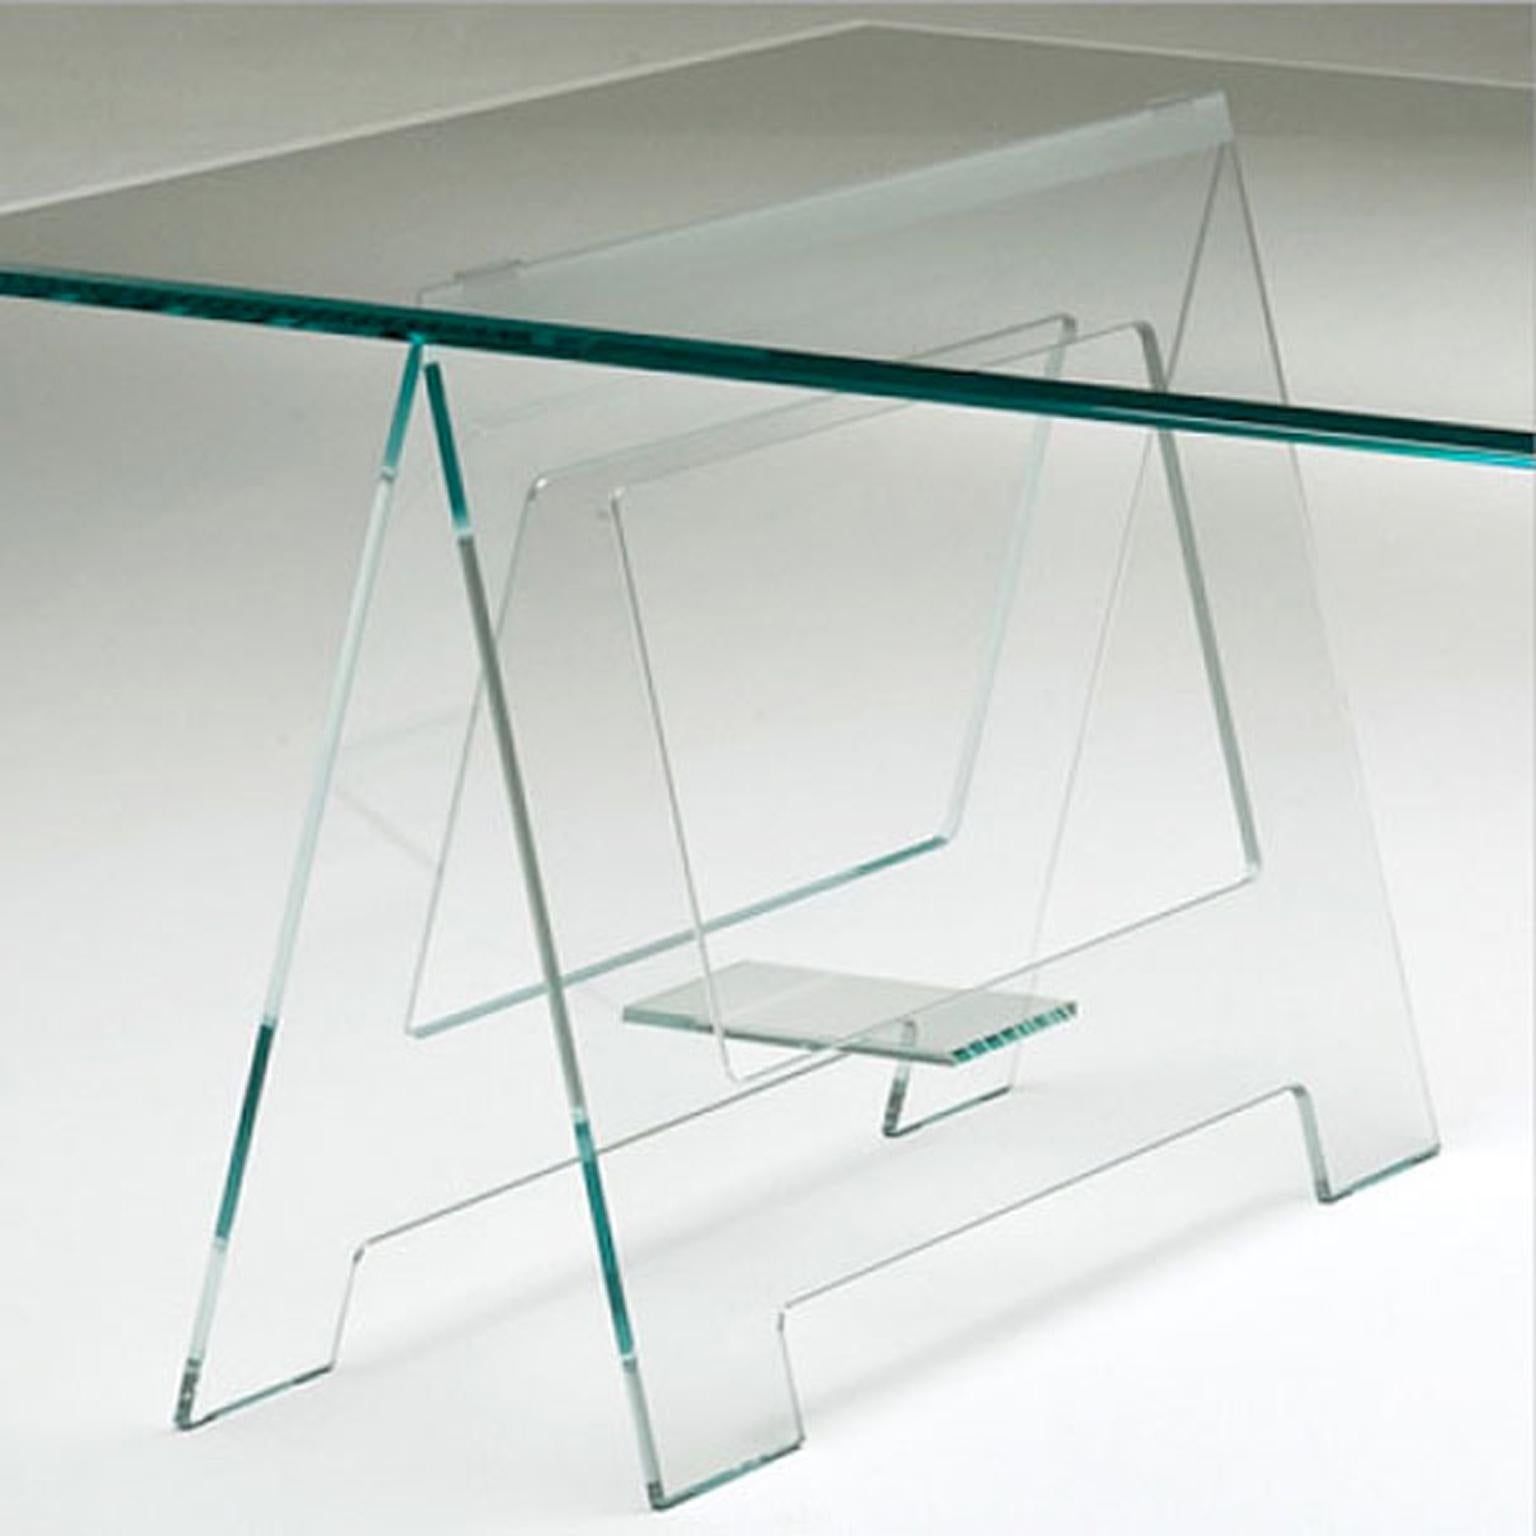 Crystal 21st Century Italian Modern Design Desk or Dining Table with Easels